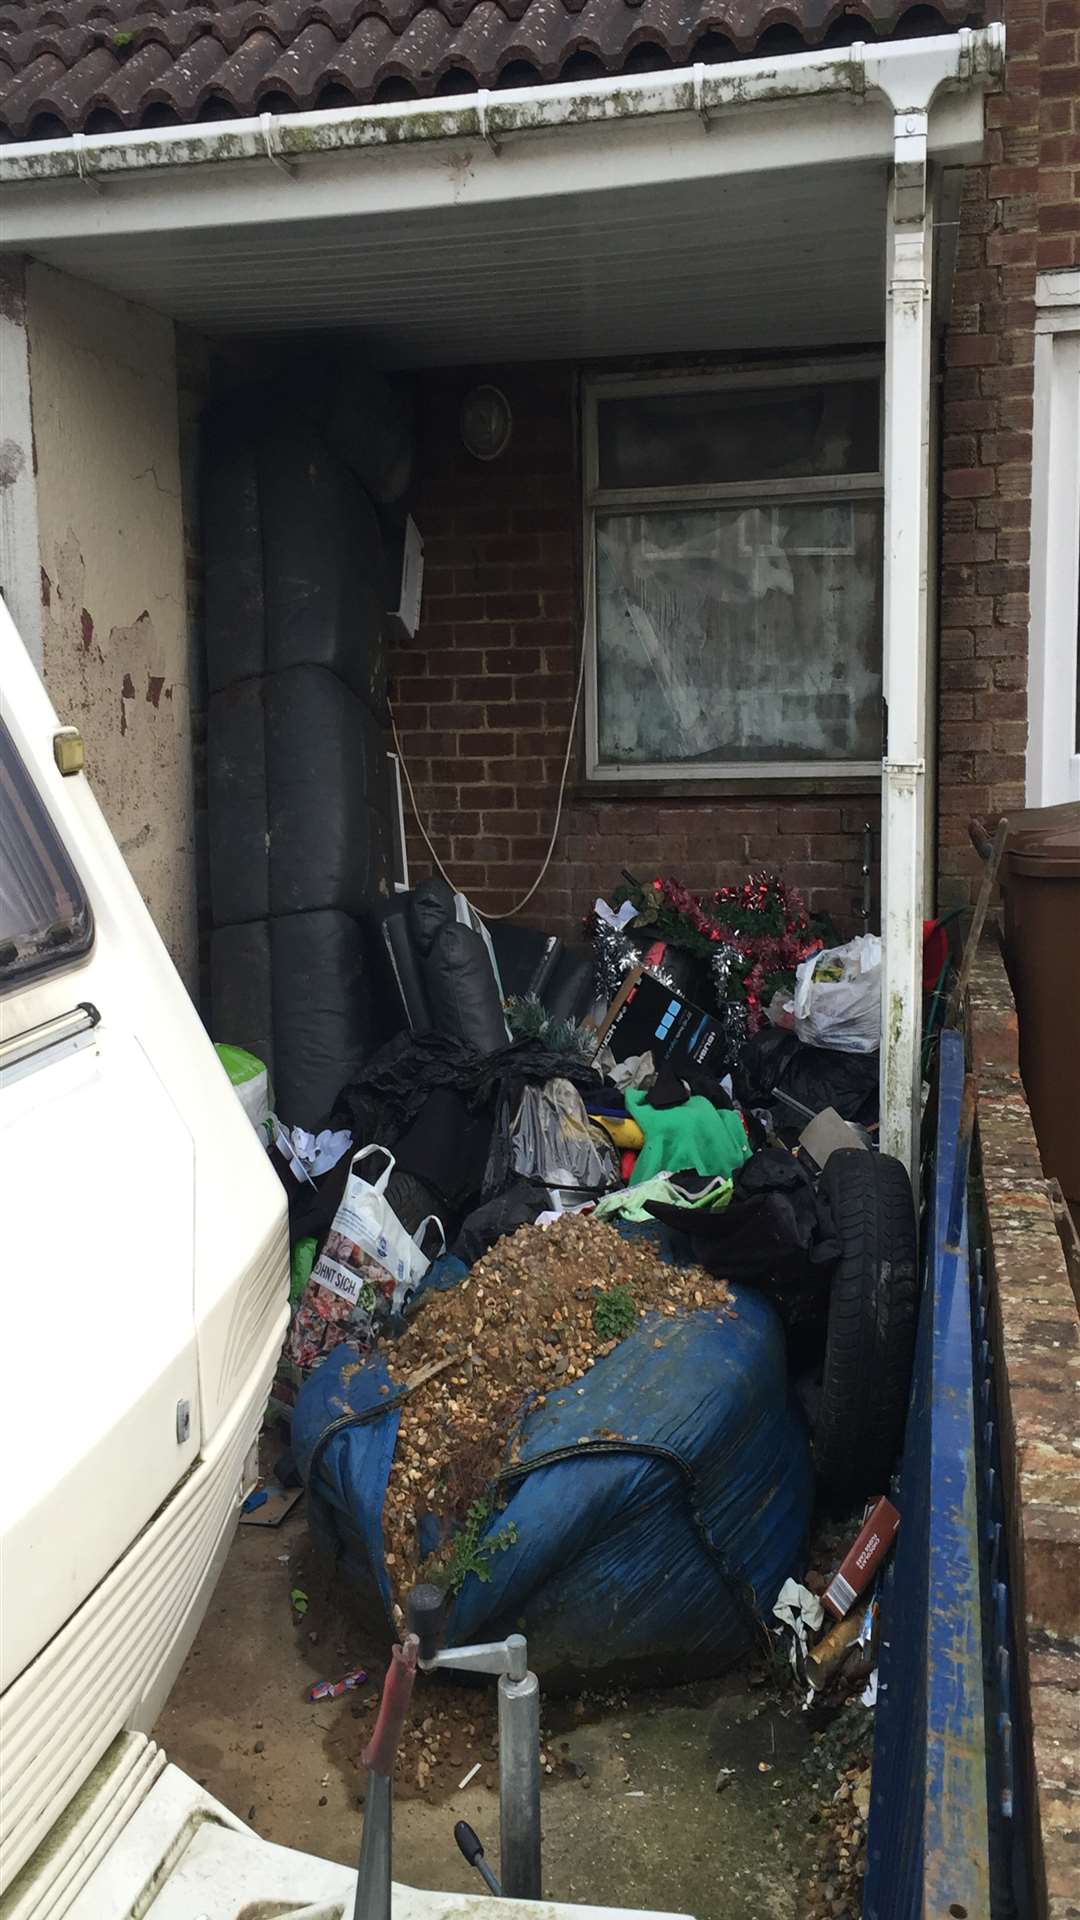 The filthy scene at Sedge Crescent,Chatham